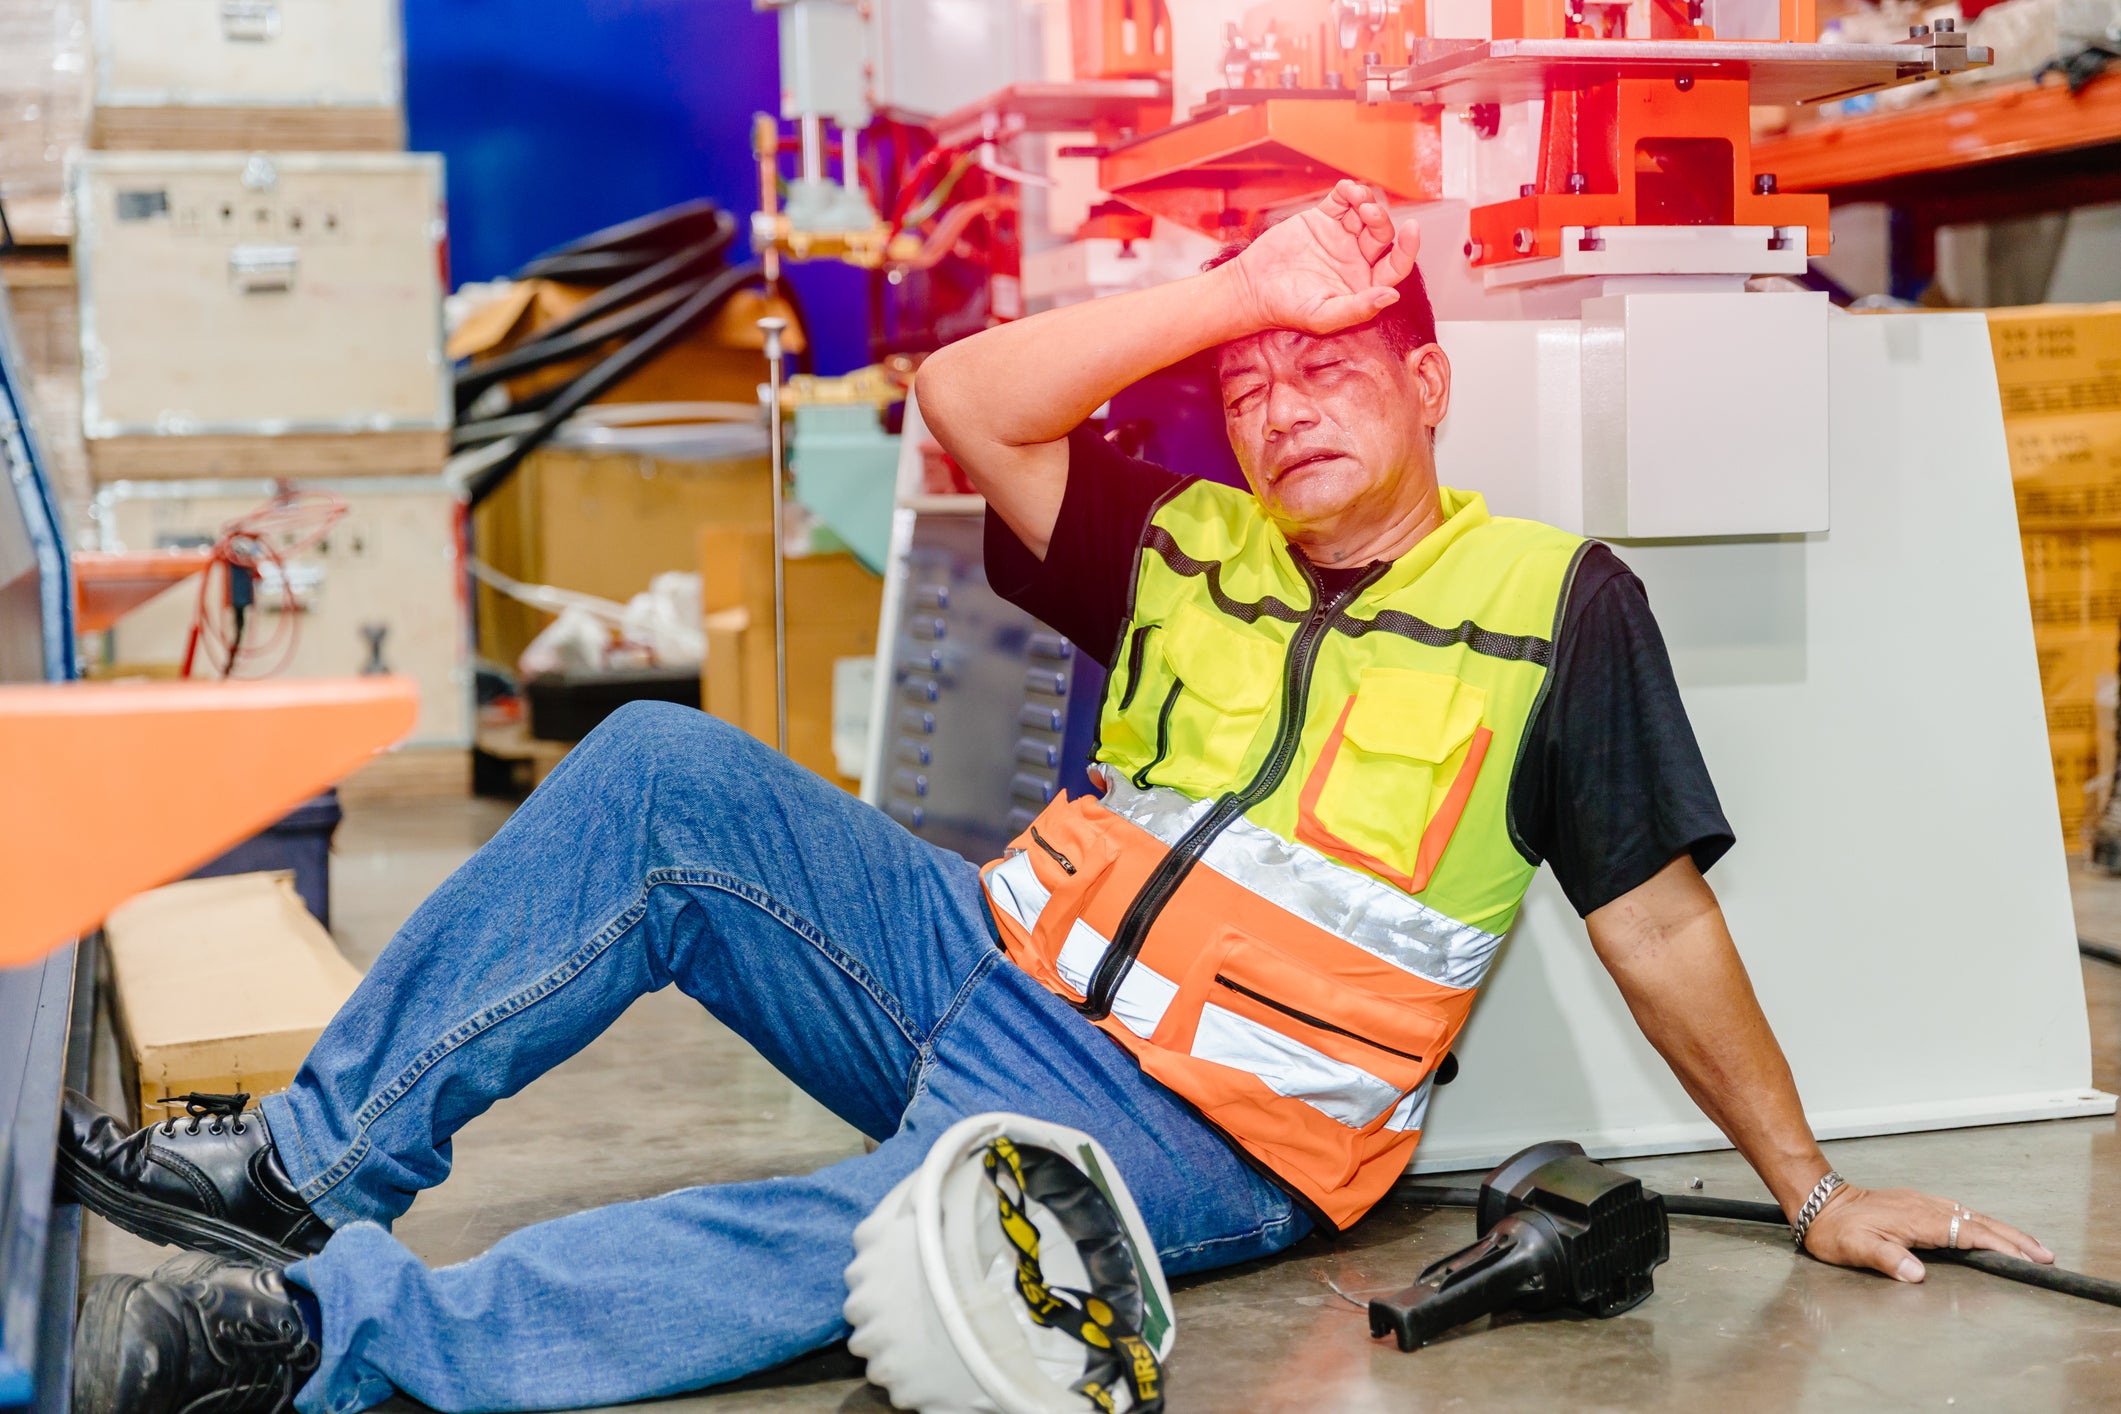 A man in a construction uniform laying on the ground.